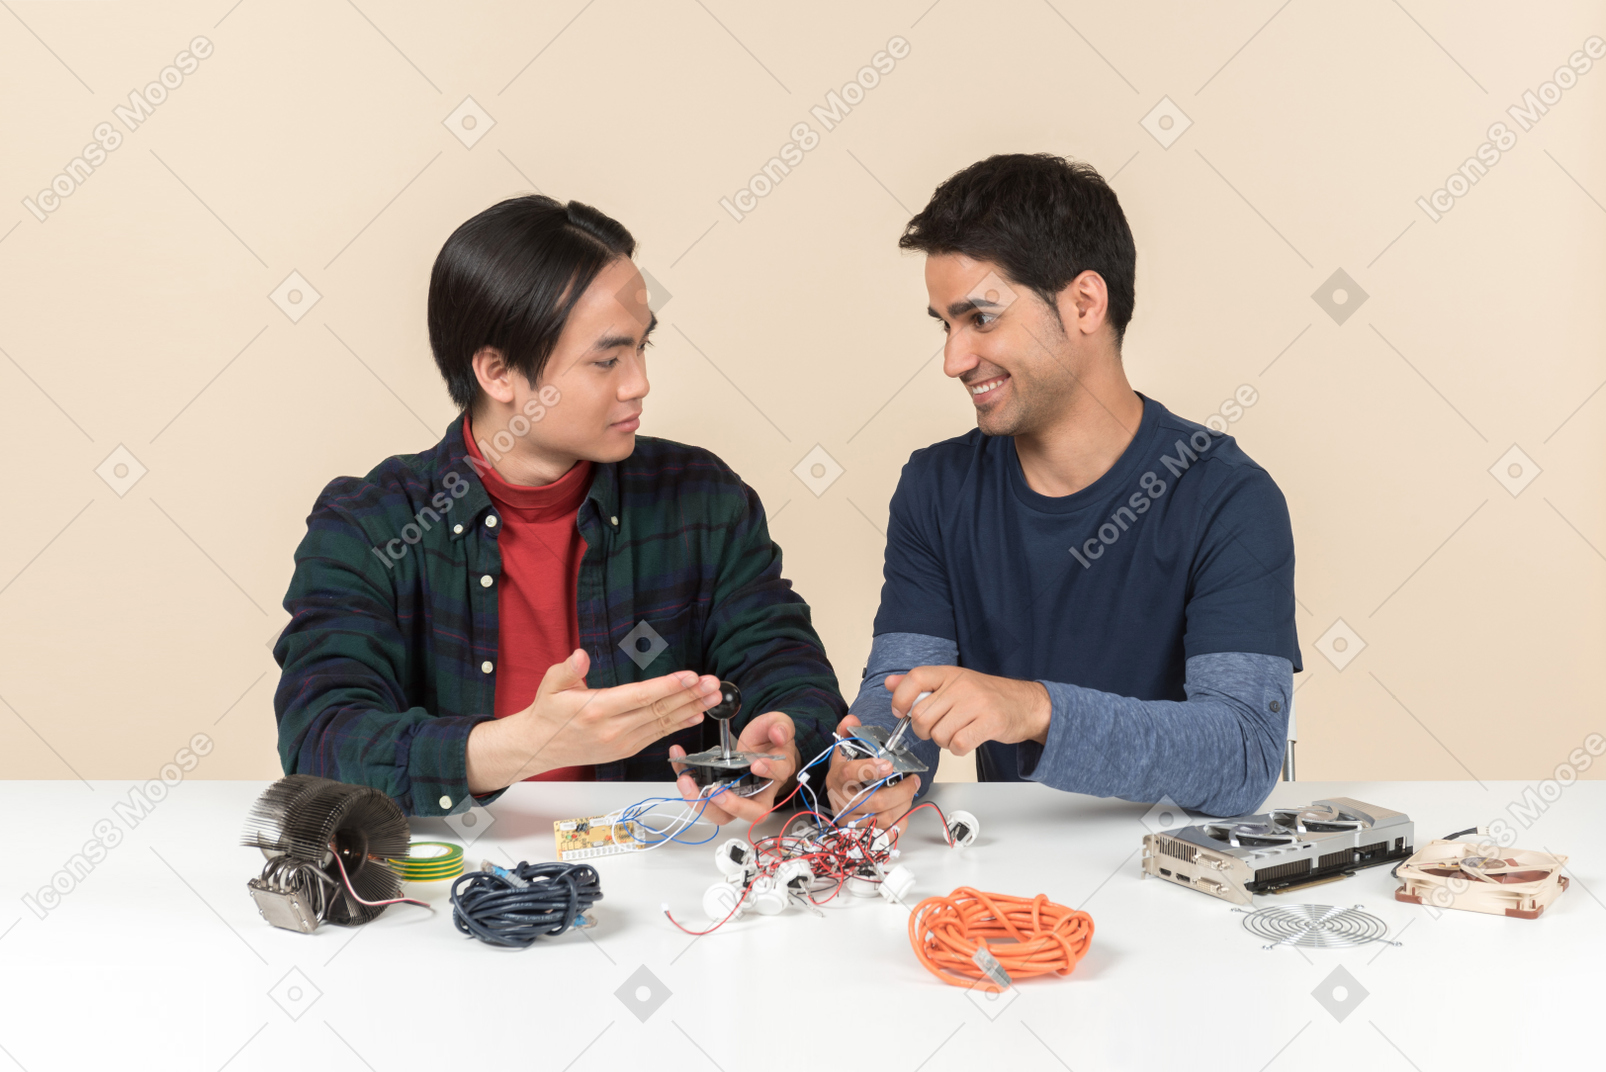 Two young geeks sitting at the table and fixing some details